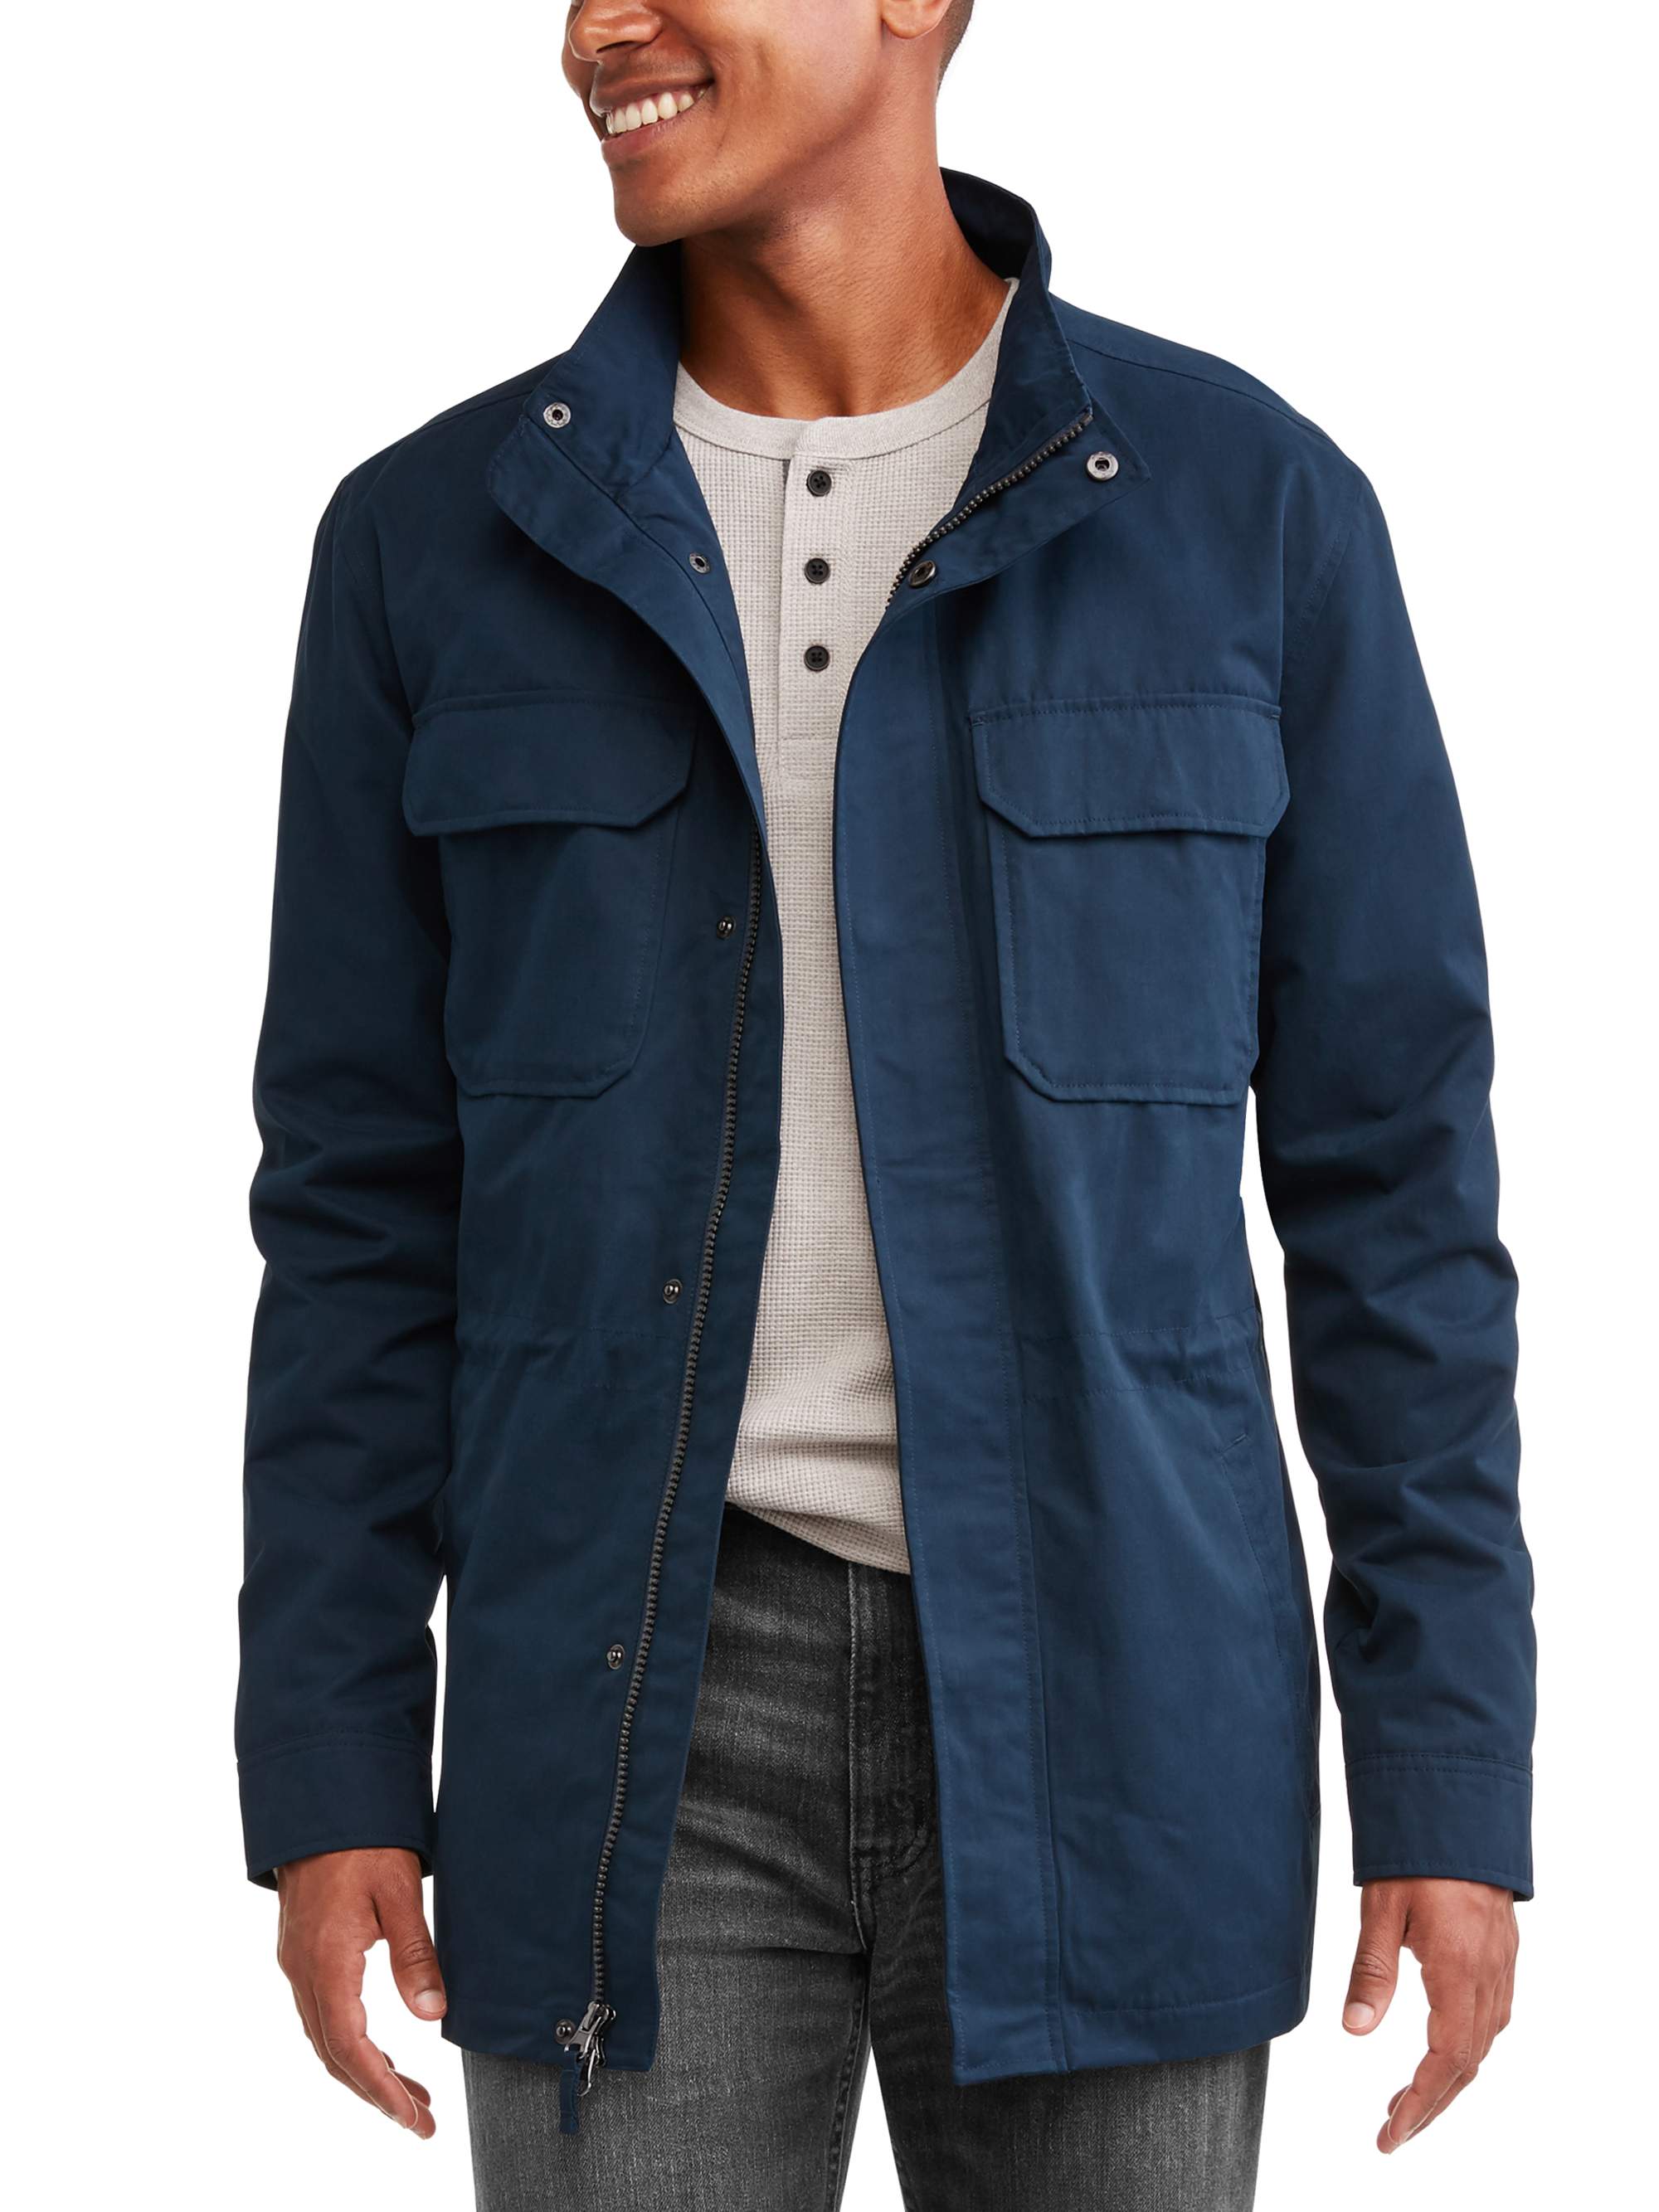 Field jacket for men: masculine and sporty through the outdoors